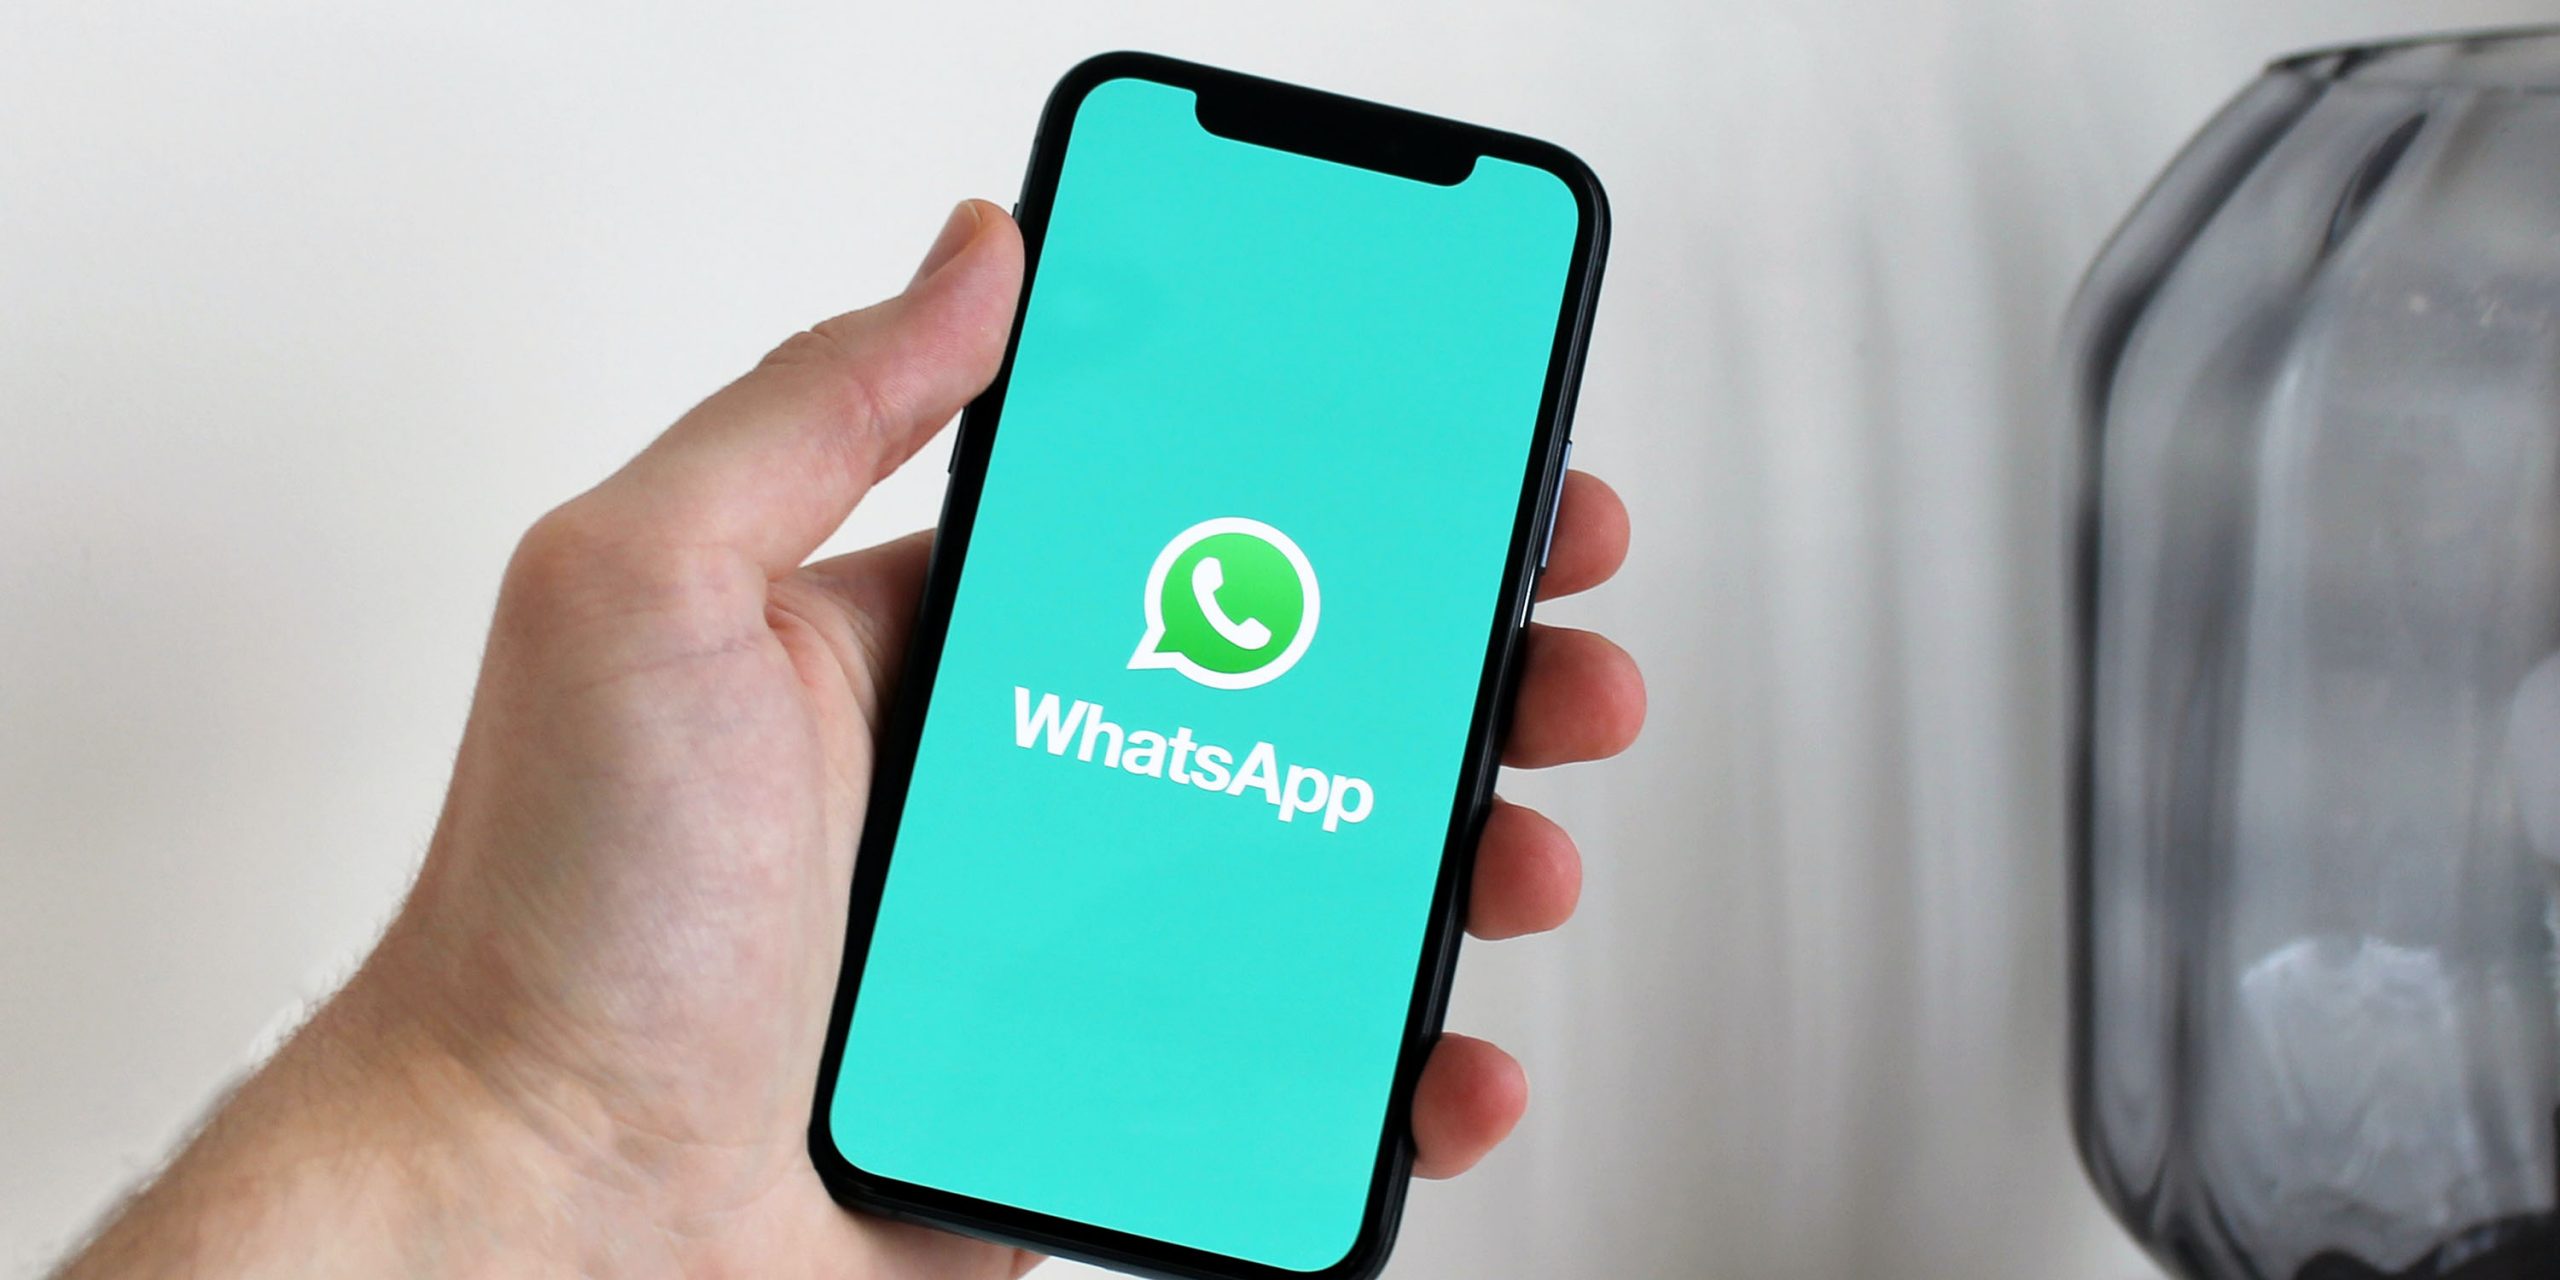 Whatsapp Is Working on New Privacy Features